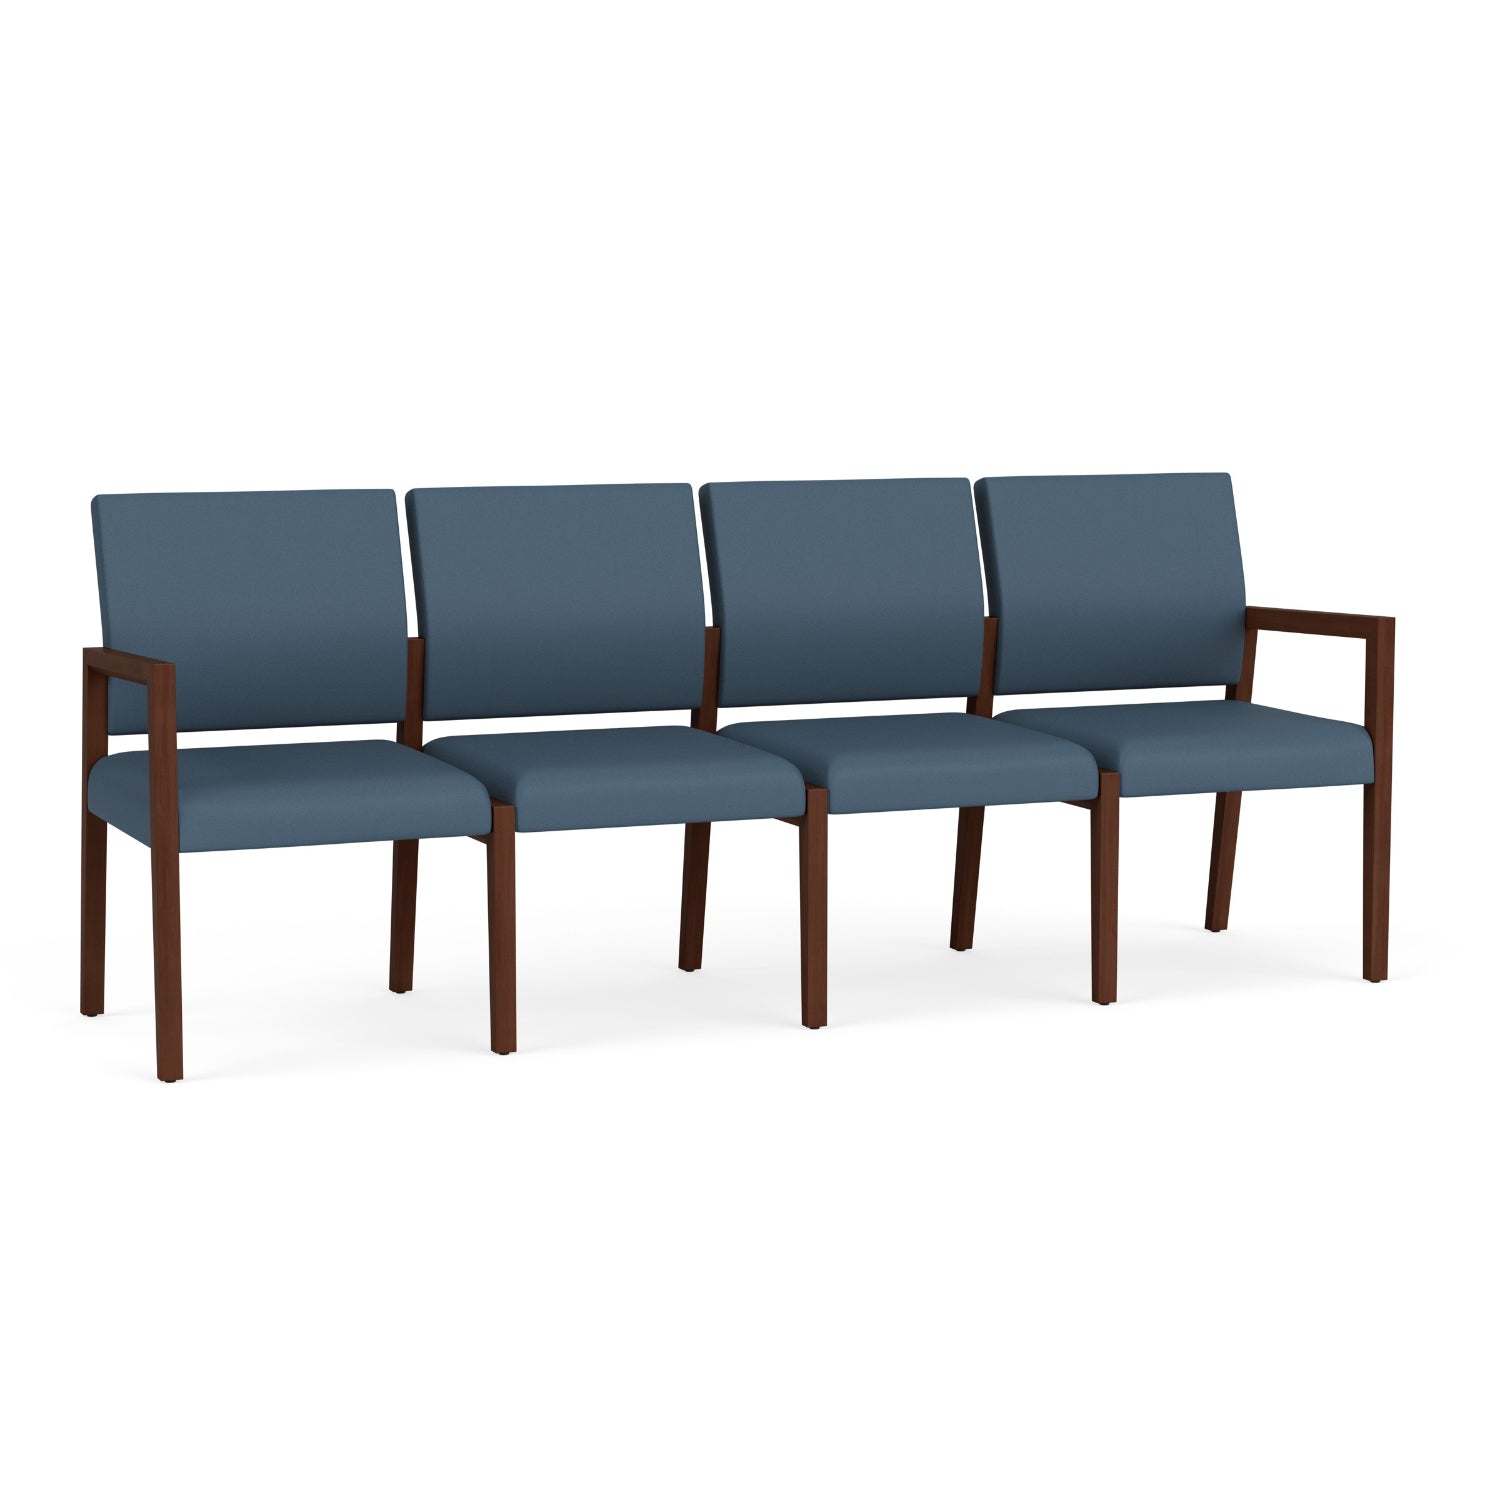 Brooklyn Collection Reception Seating, 4 Seat Sofa, Standard Vinyl Upholstery, FREE SHIPPING